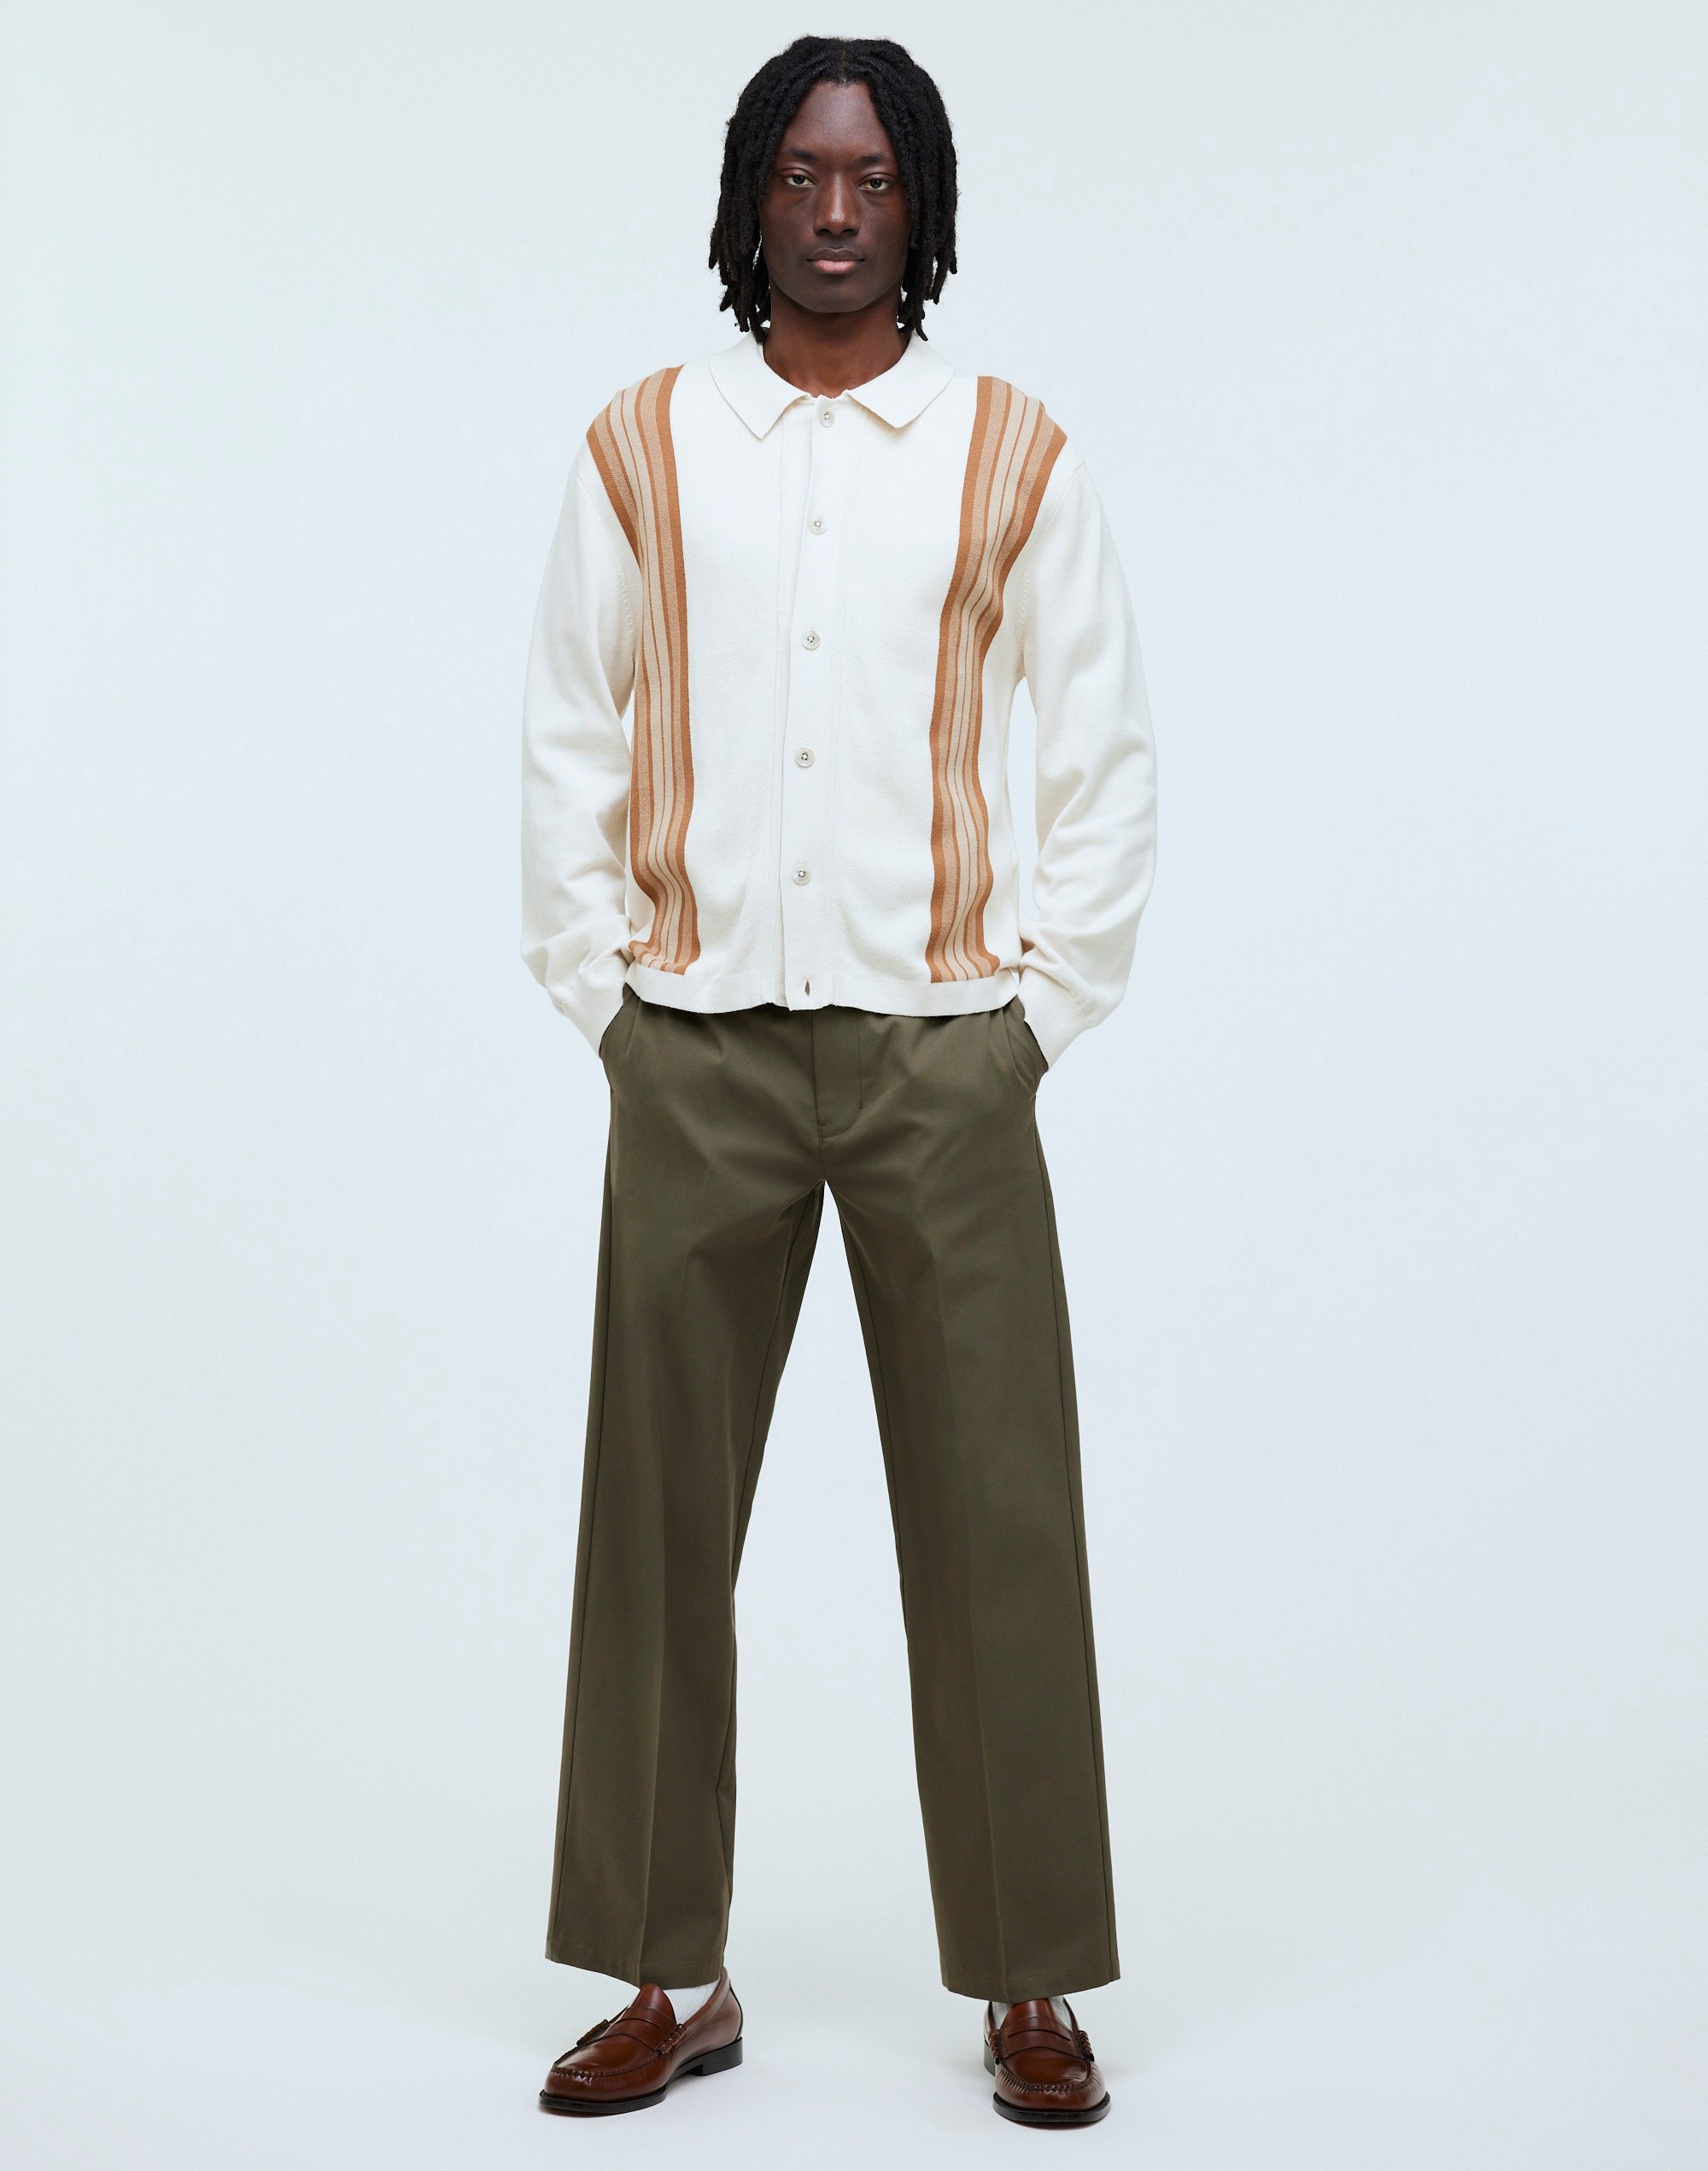 Cotton-Wool Blend Trousers